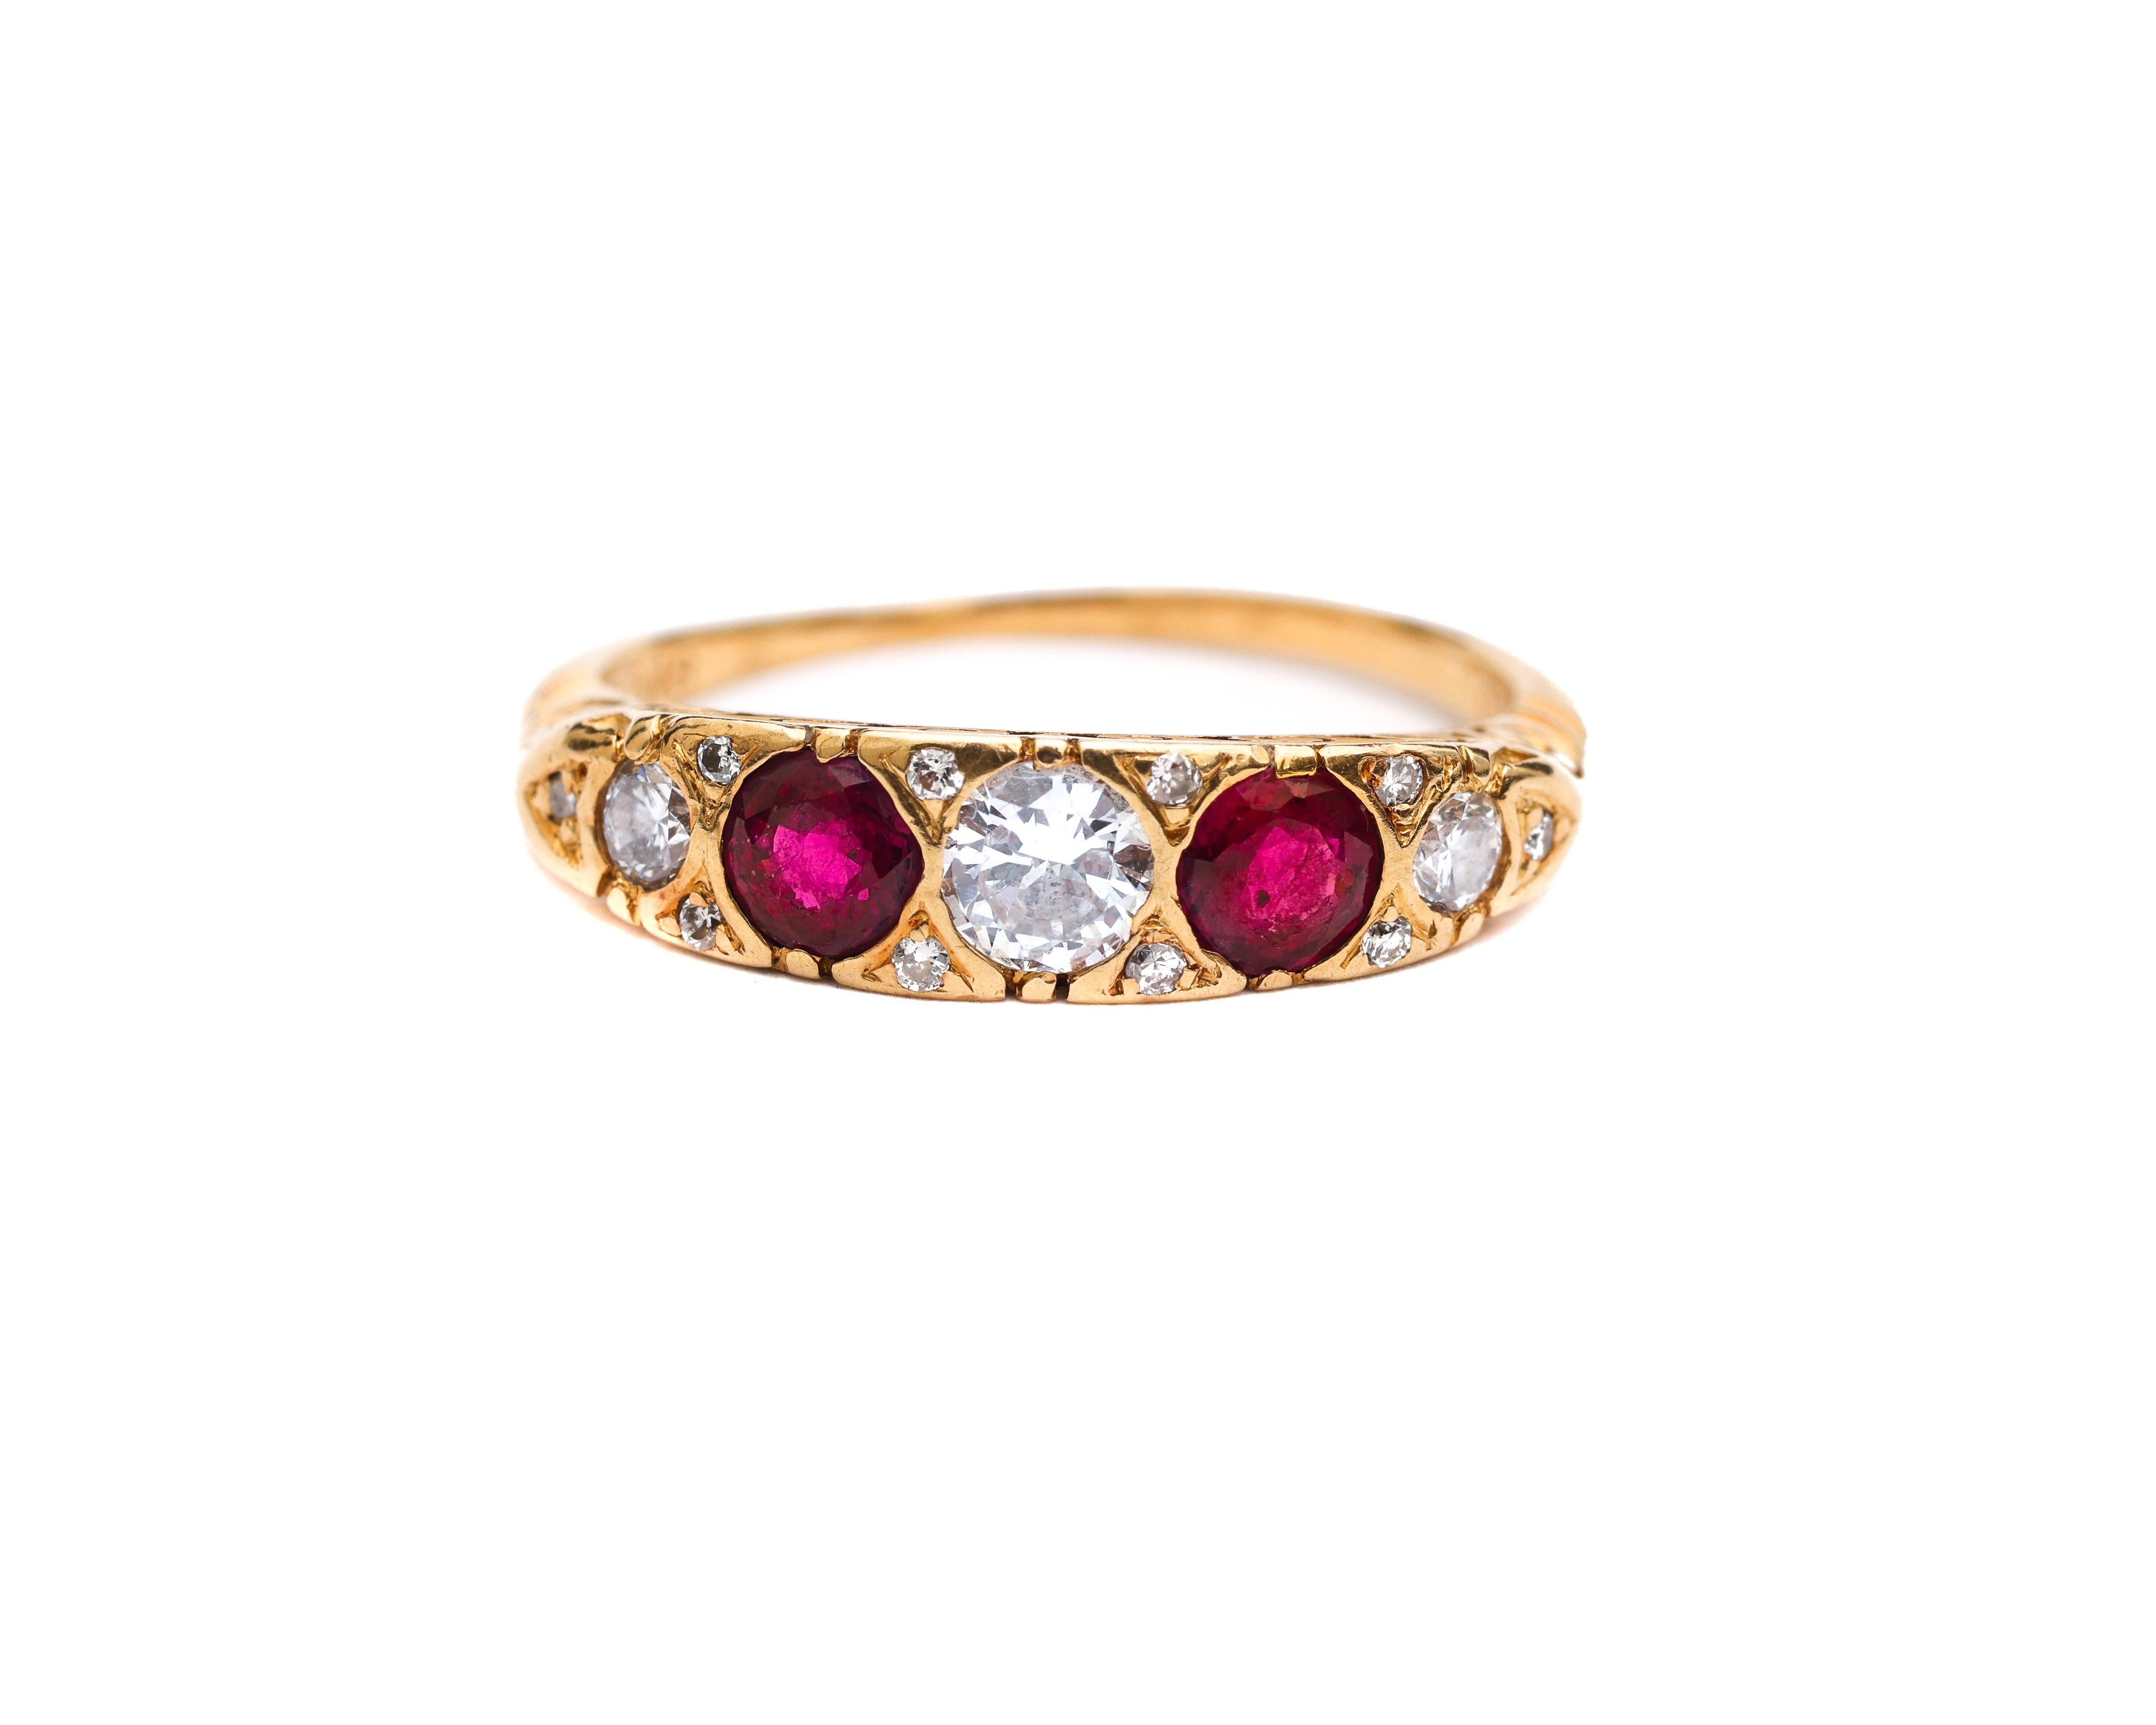 1920s Diamond and Ruby Band Ring, 18 Karat Gold In Excellent Condition For Sale In Atlanta, GA